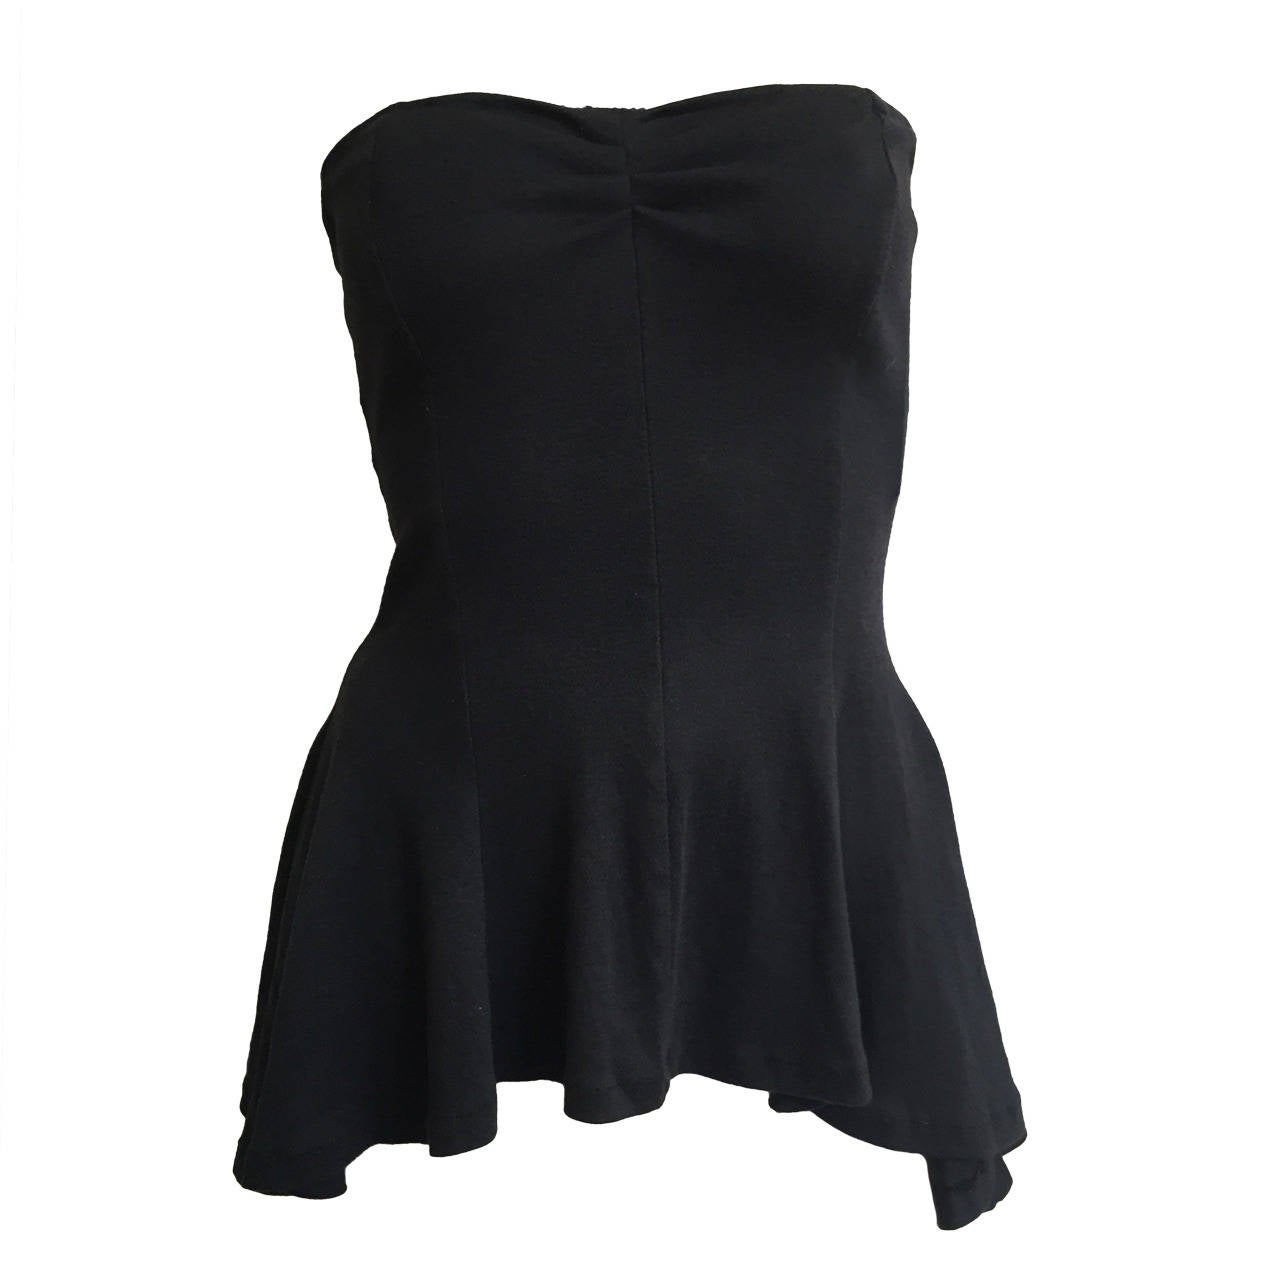 Norma Kamali Black Cotton Strapless Top Size Small. For Sale at 1stDibs